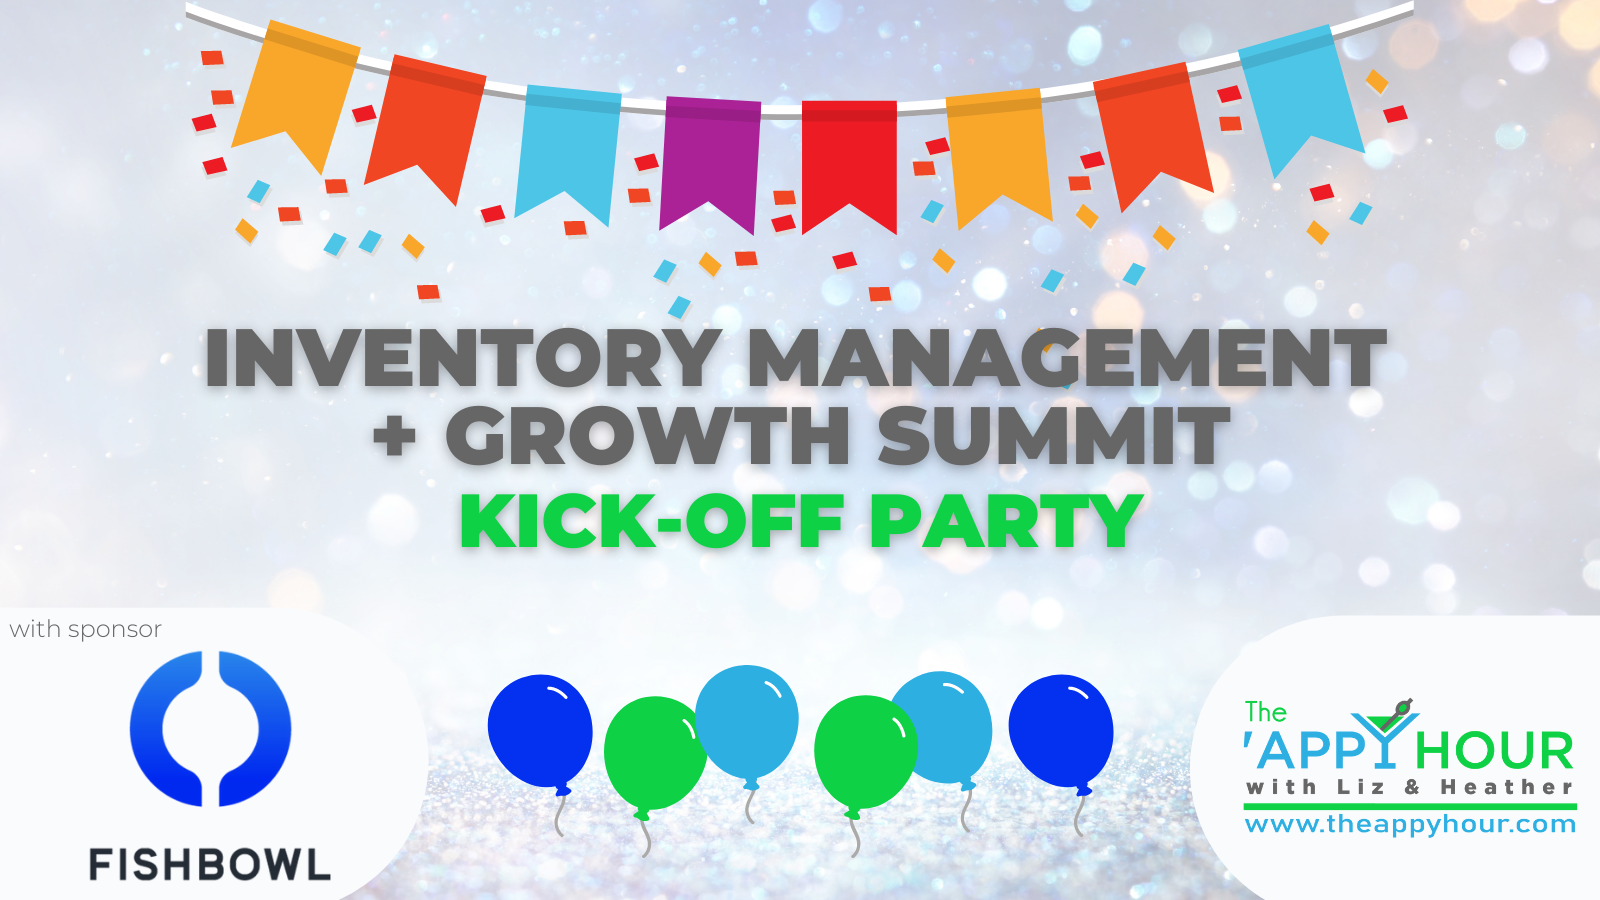 Inventory Management + Growth Summit Kick-Off Party!